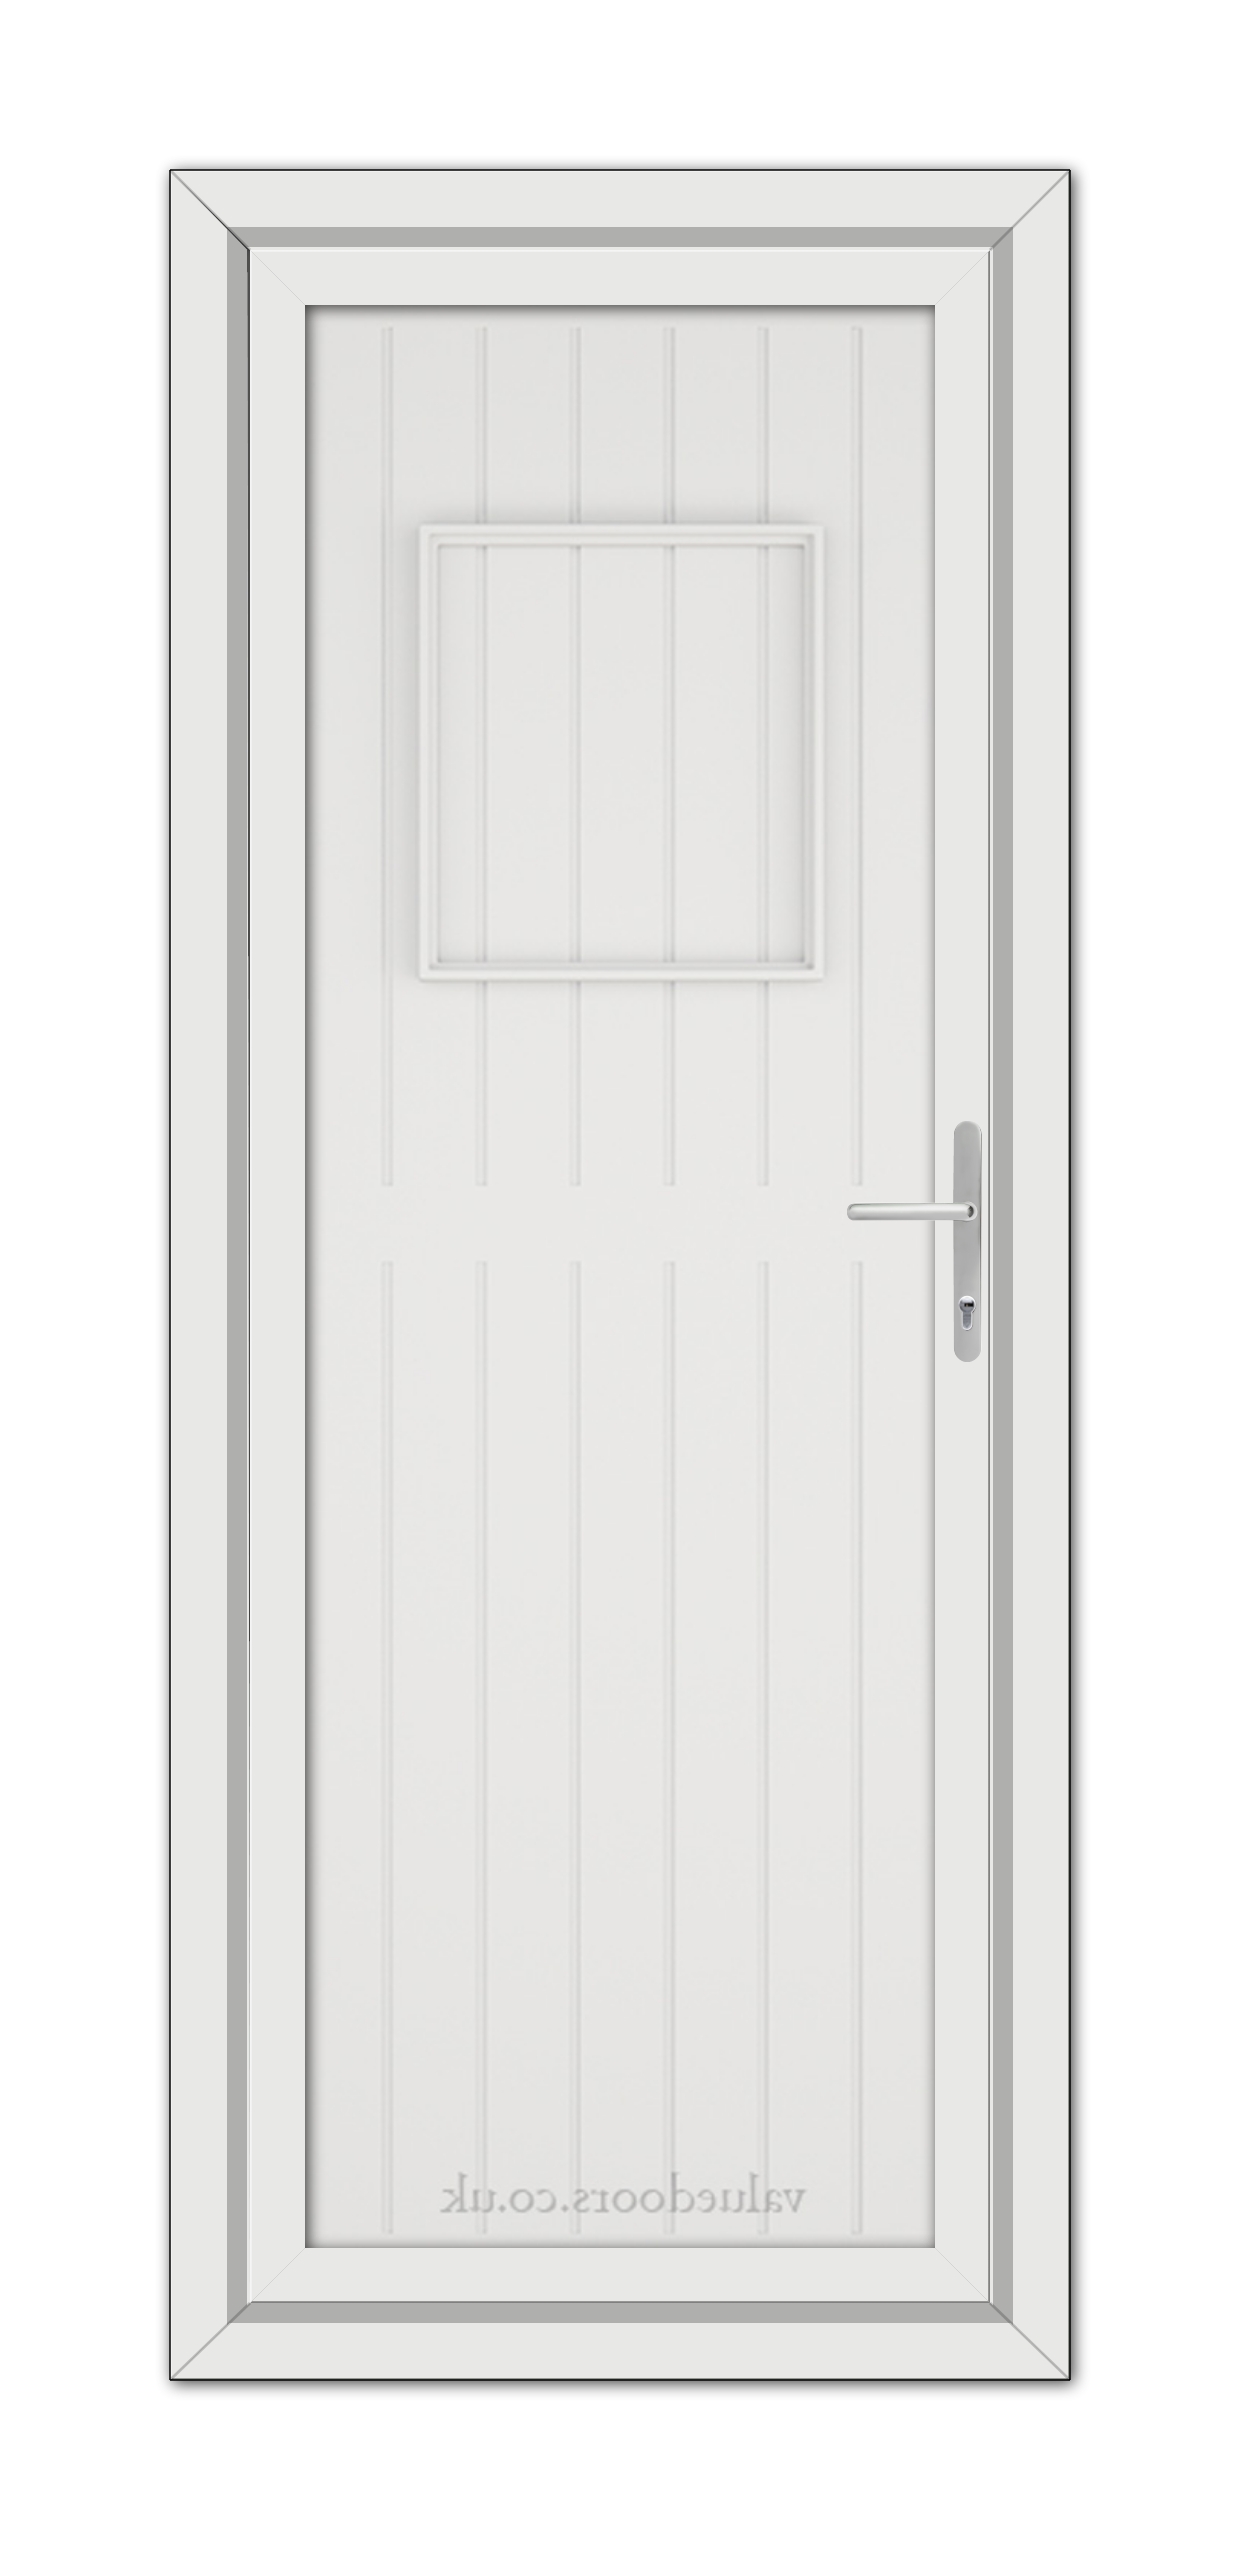 A White Chatsworth Solid uPVC Door with a rectangular window at the top and a metal handle on the right side, set in a white frame.